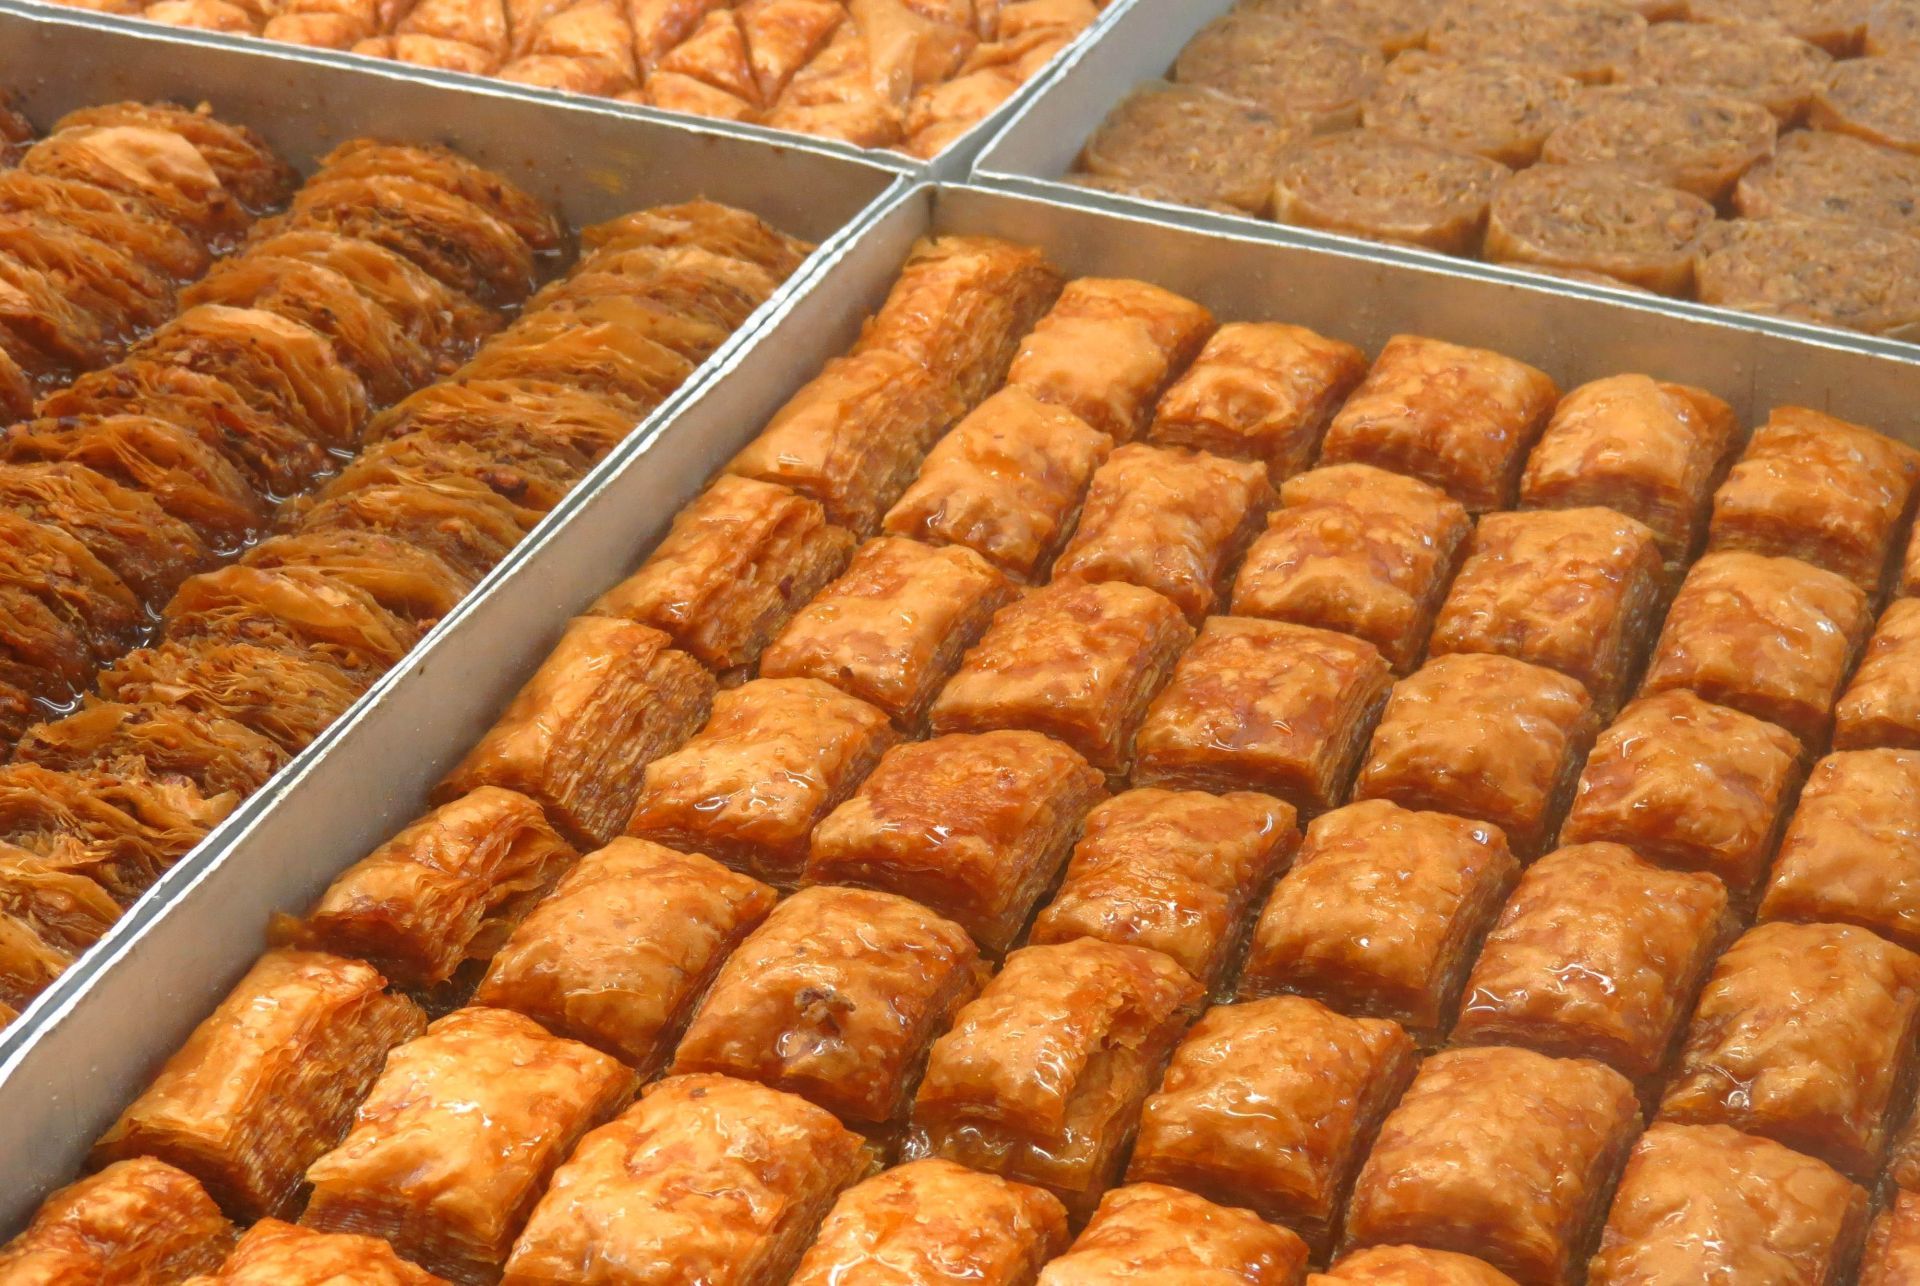 Baklava in a pastry shop in Athens, Greece